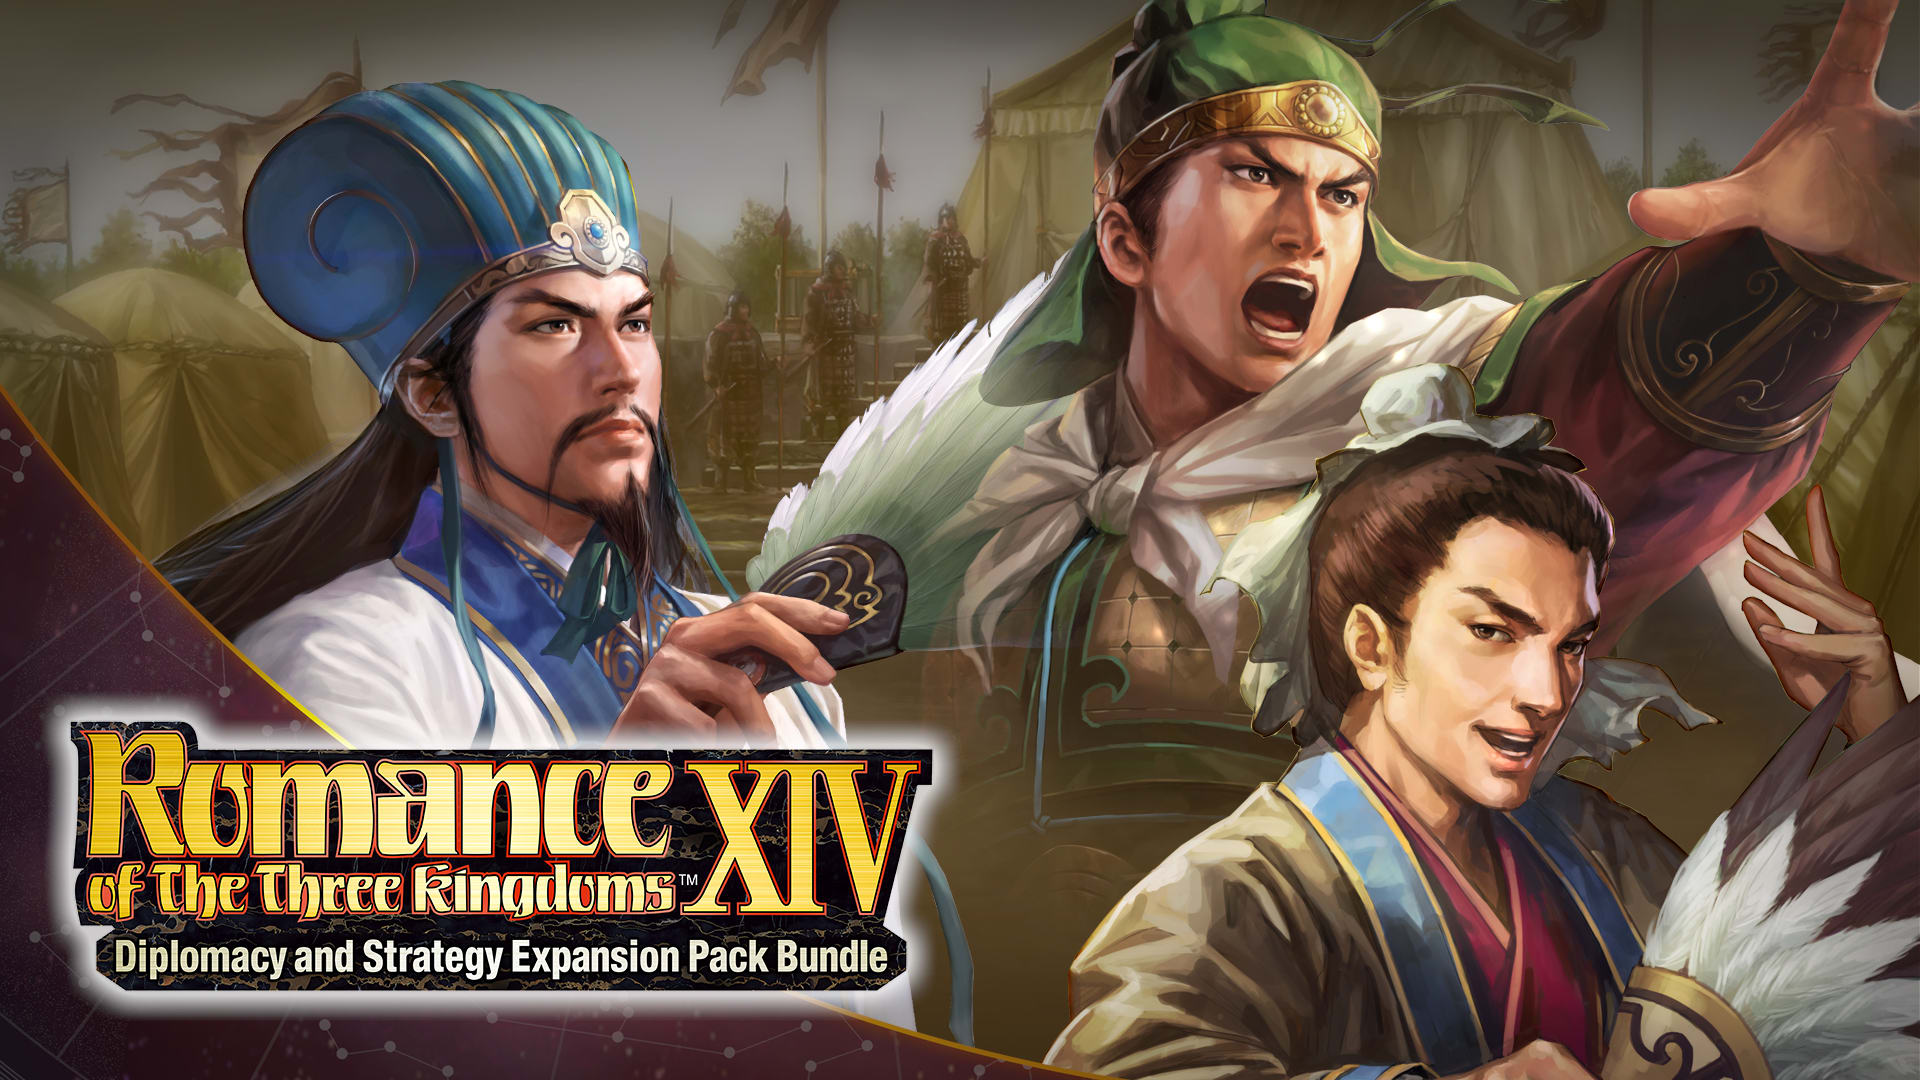 "Zhuge Liang's Northern Campaign" Event Set